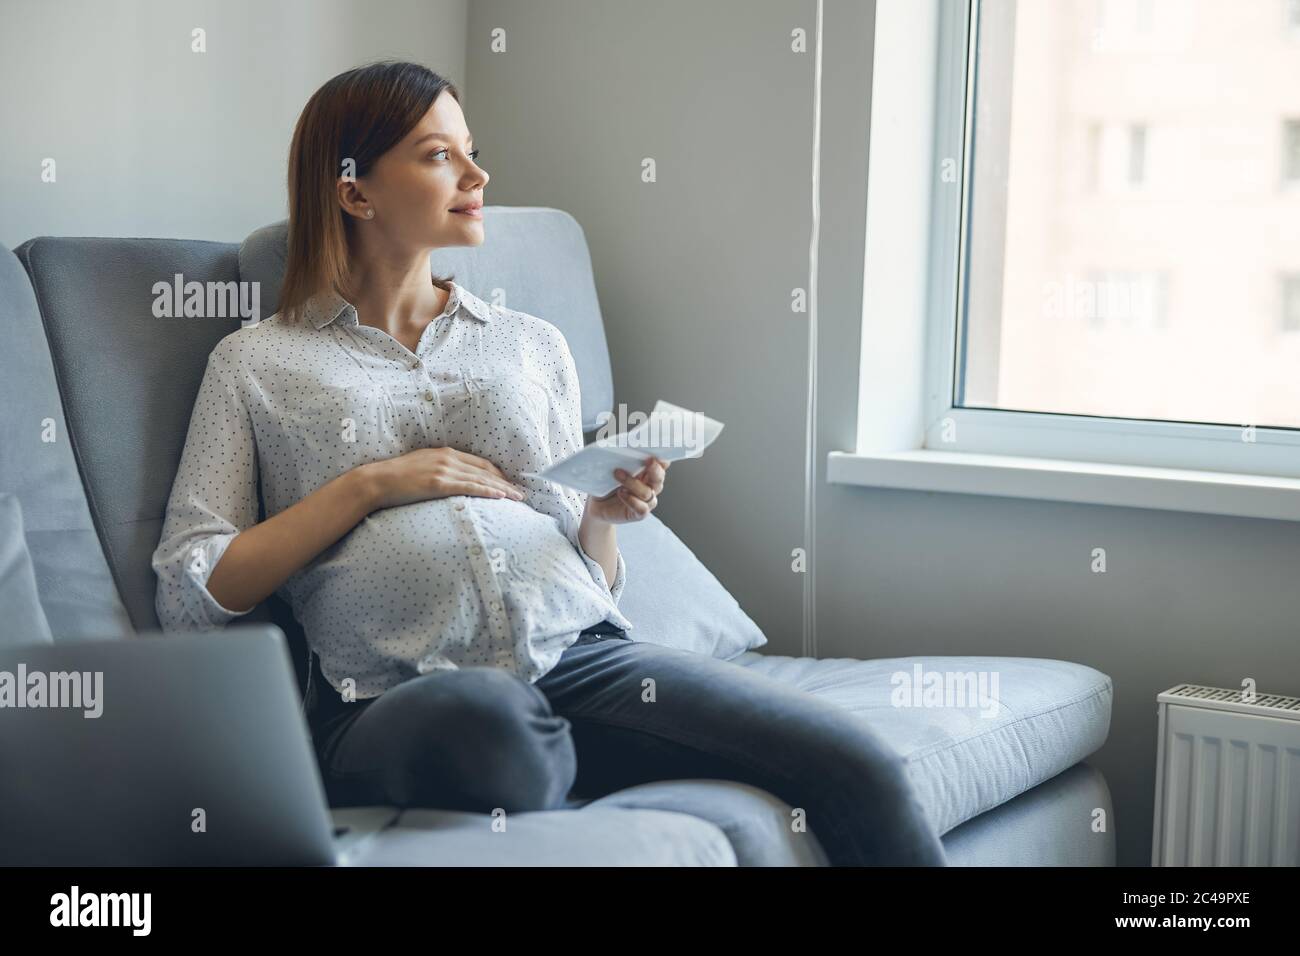 Dreamy lady with gadget by her side sitting on the sofa alone Stock Photo